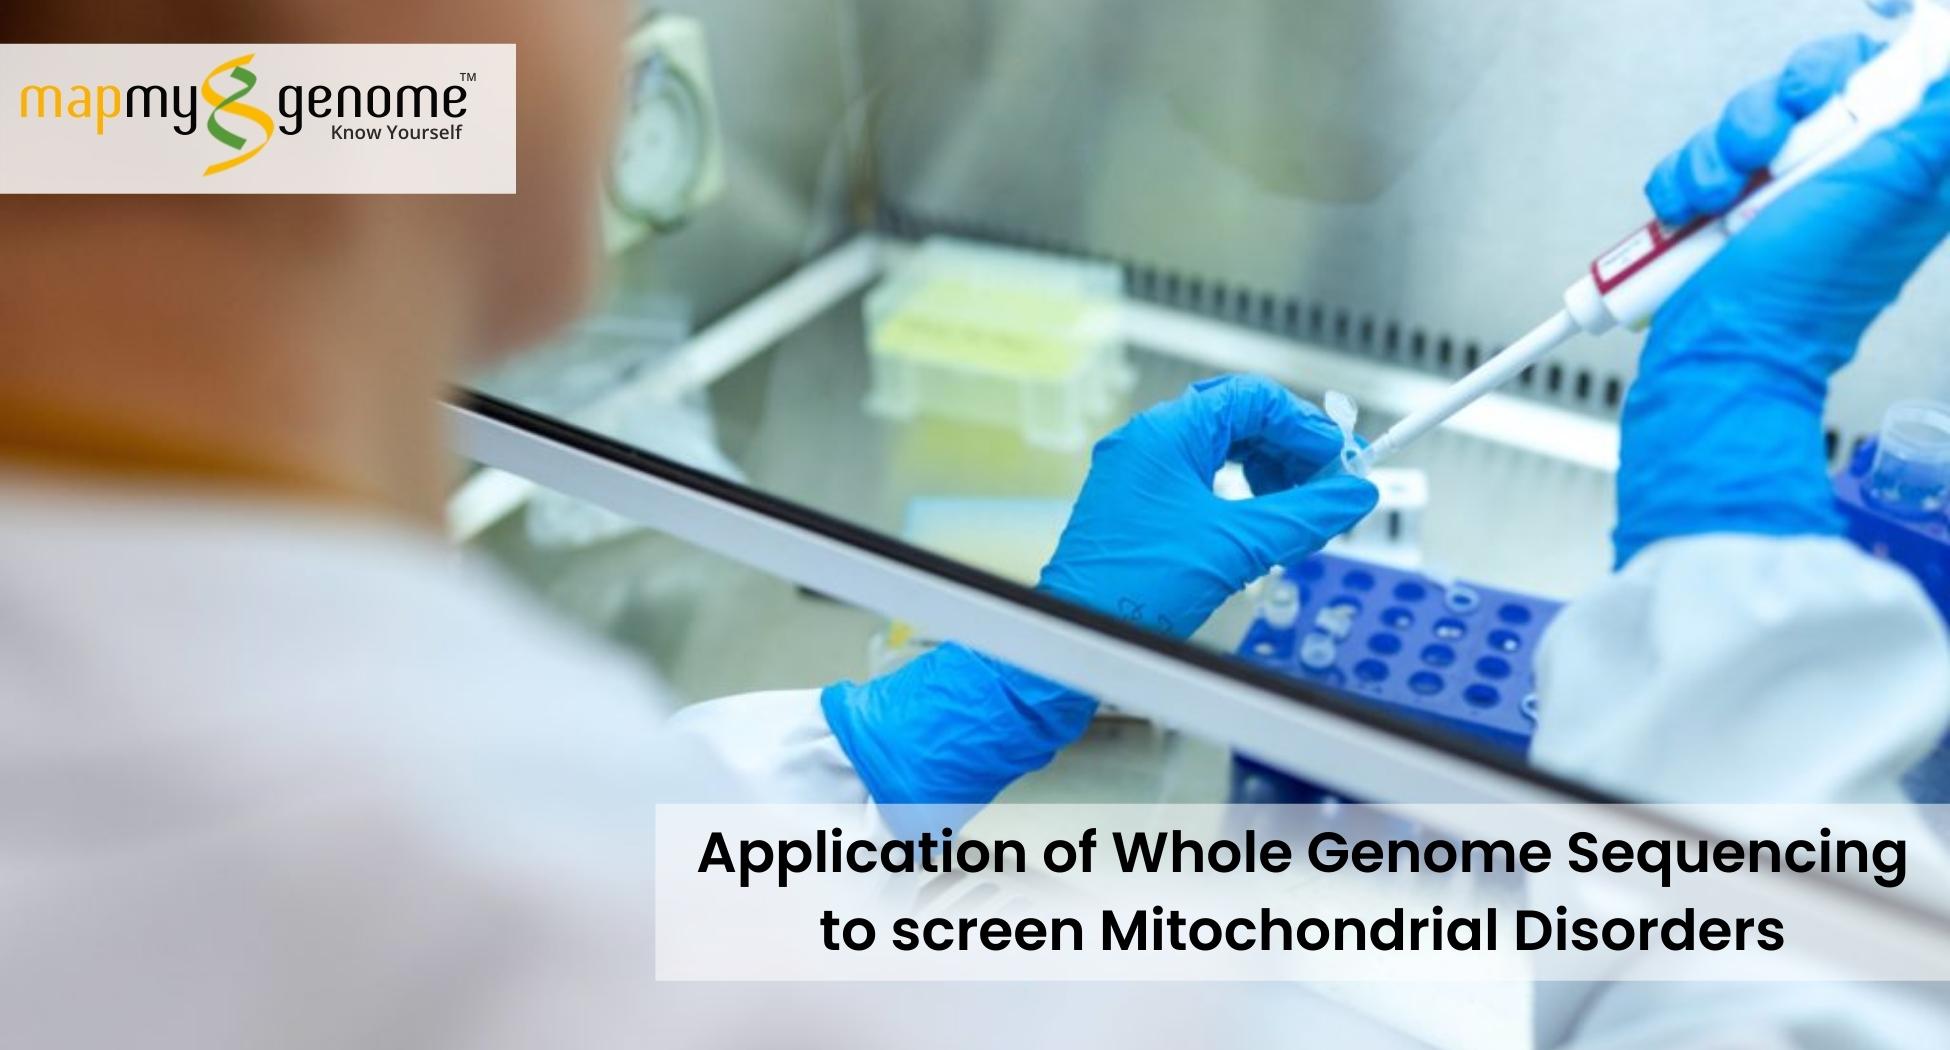 Application of Whole Genome Sequencing to screen Mitochondrial Disorders